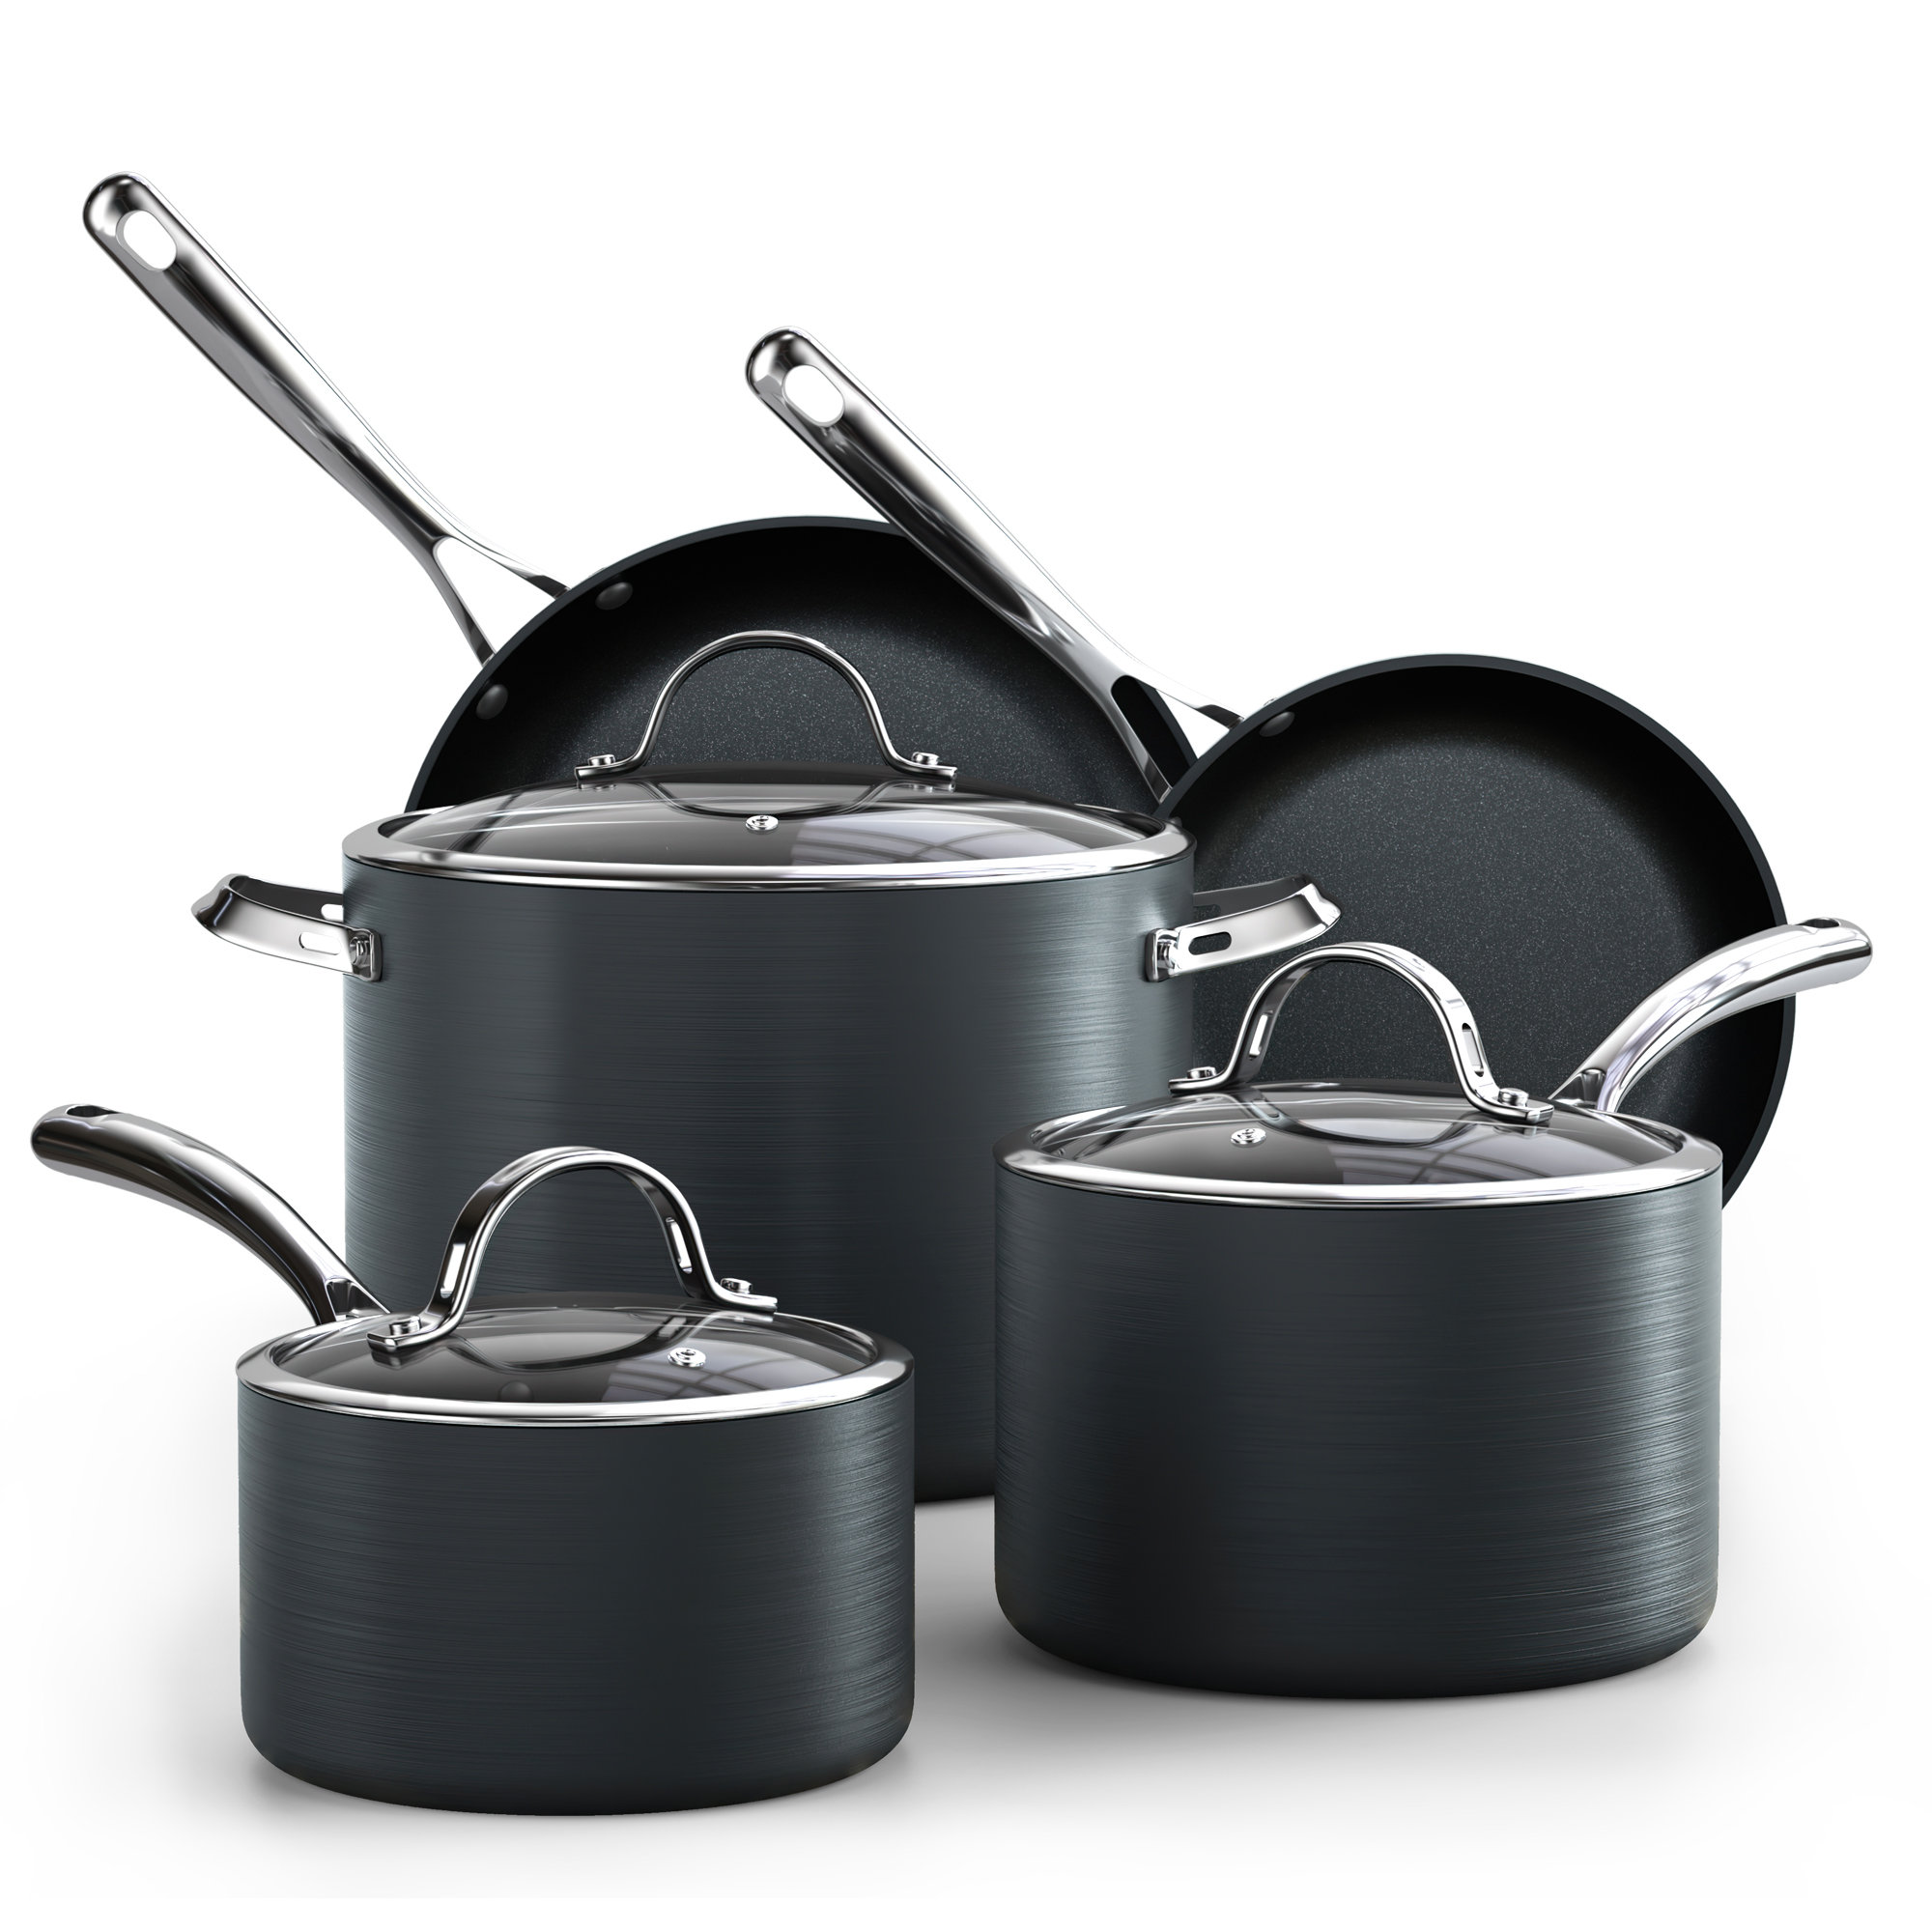 Cooks Standard 8-Piece Nonstick Hard Anodized Cookware Set, Pots and P